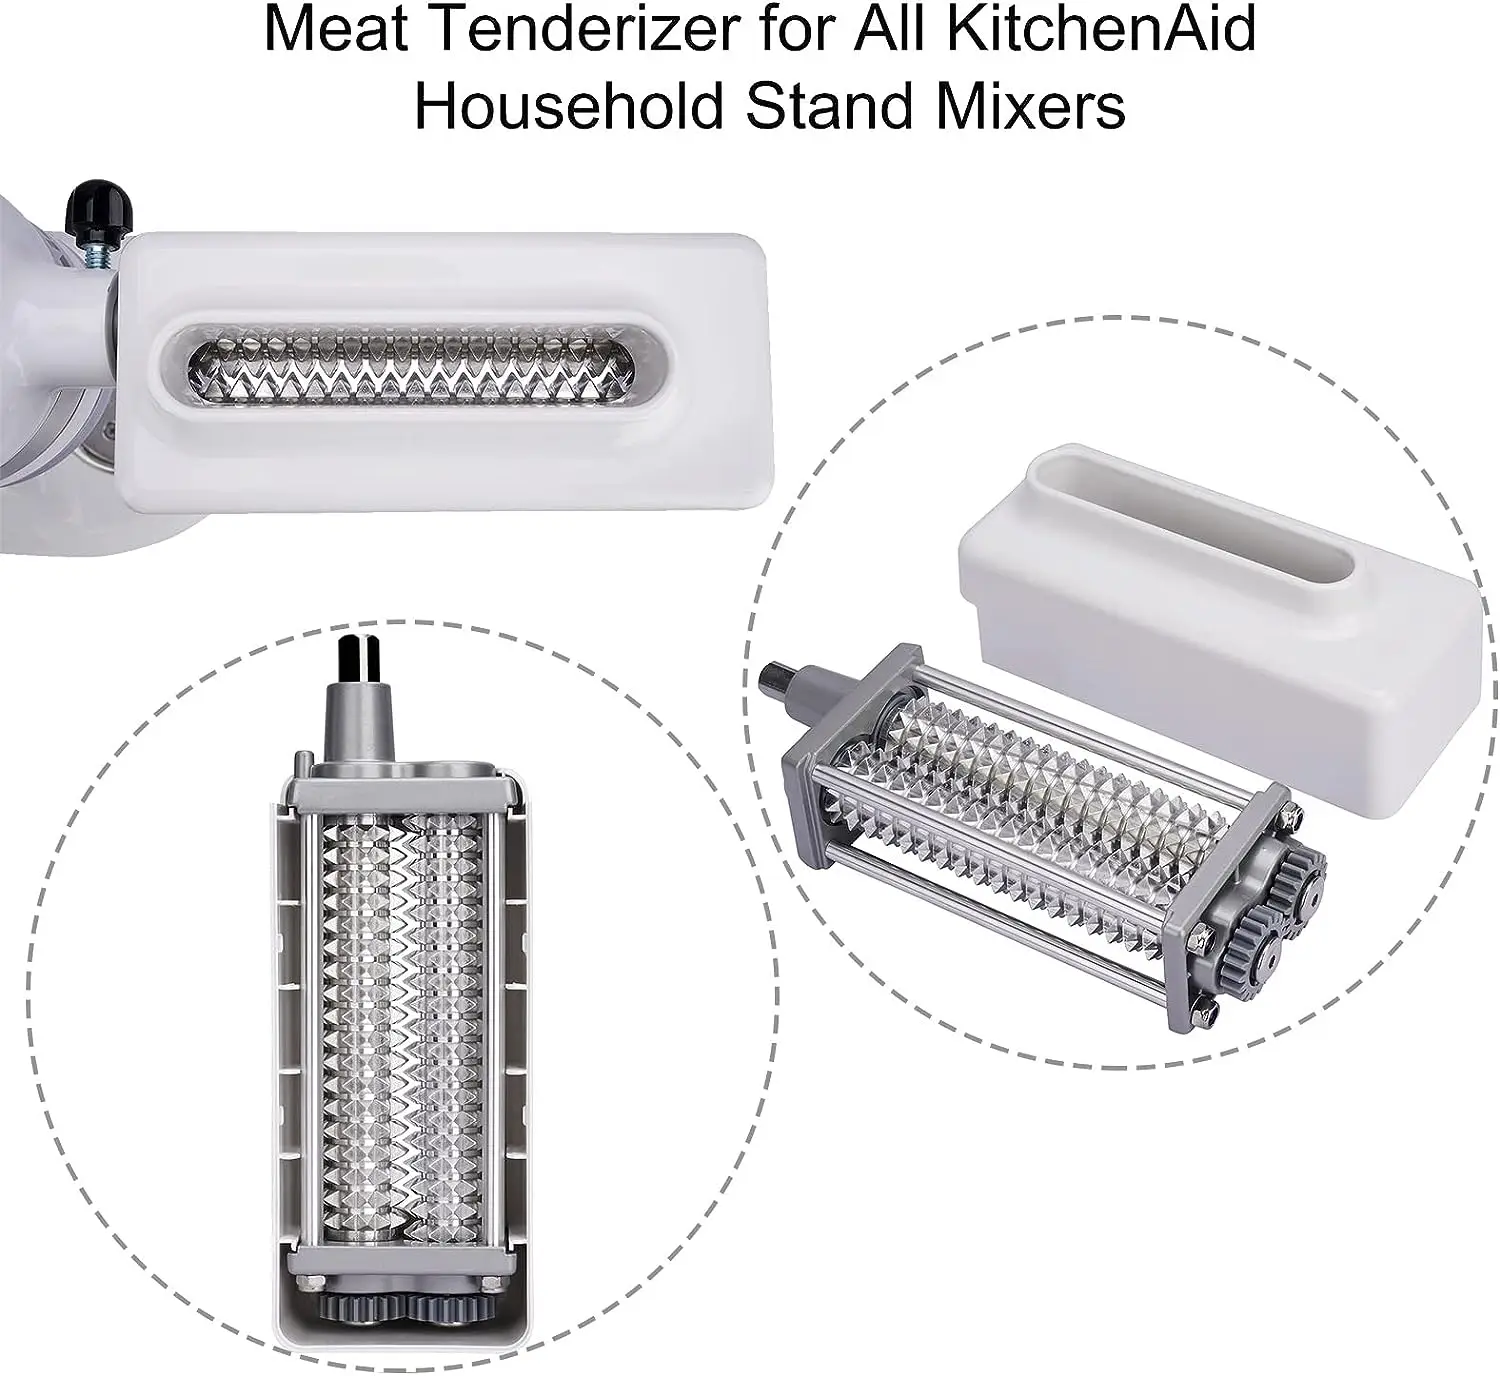 Upgrademeat Tenderizer Attachment for All KitchenAid Household Stand Mixers- Mixers Accesssories[Blue]